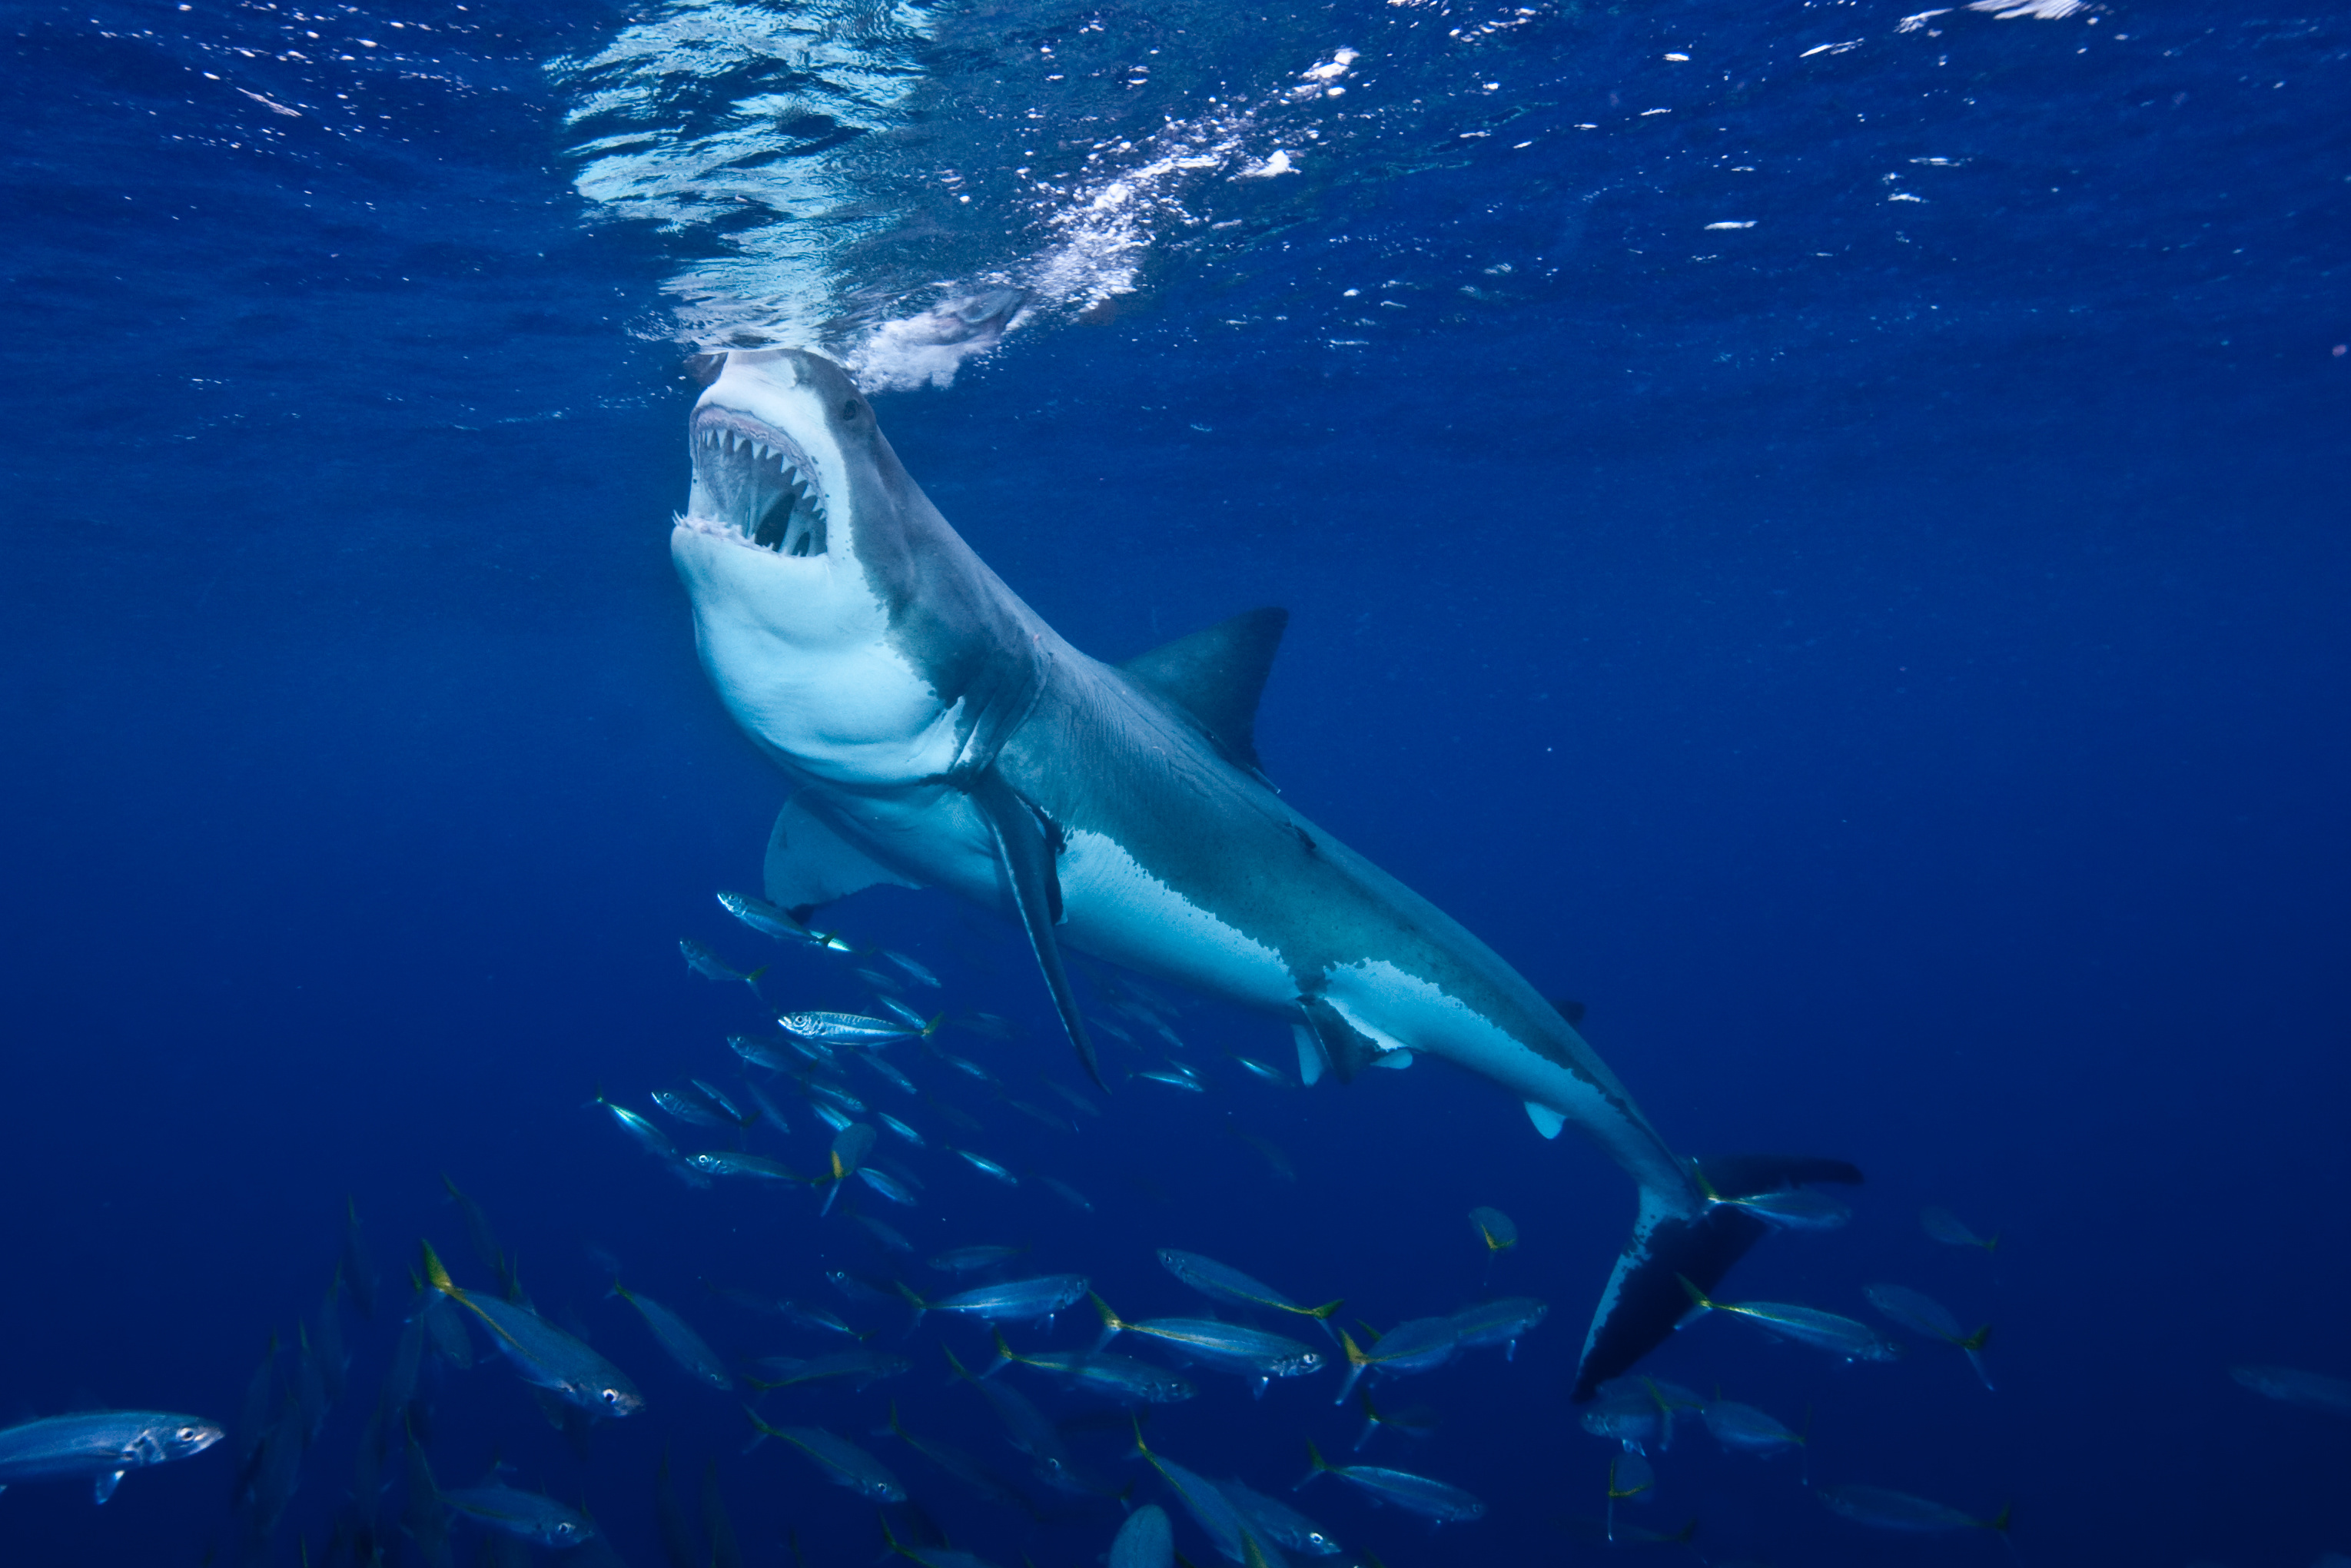 Great white shark swimming towards the surface with its mouth open in an attempt to eat some shark bait